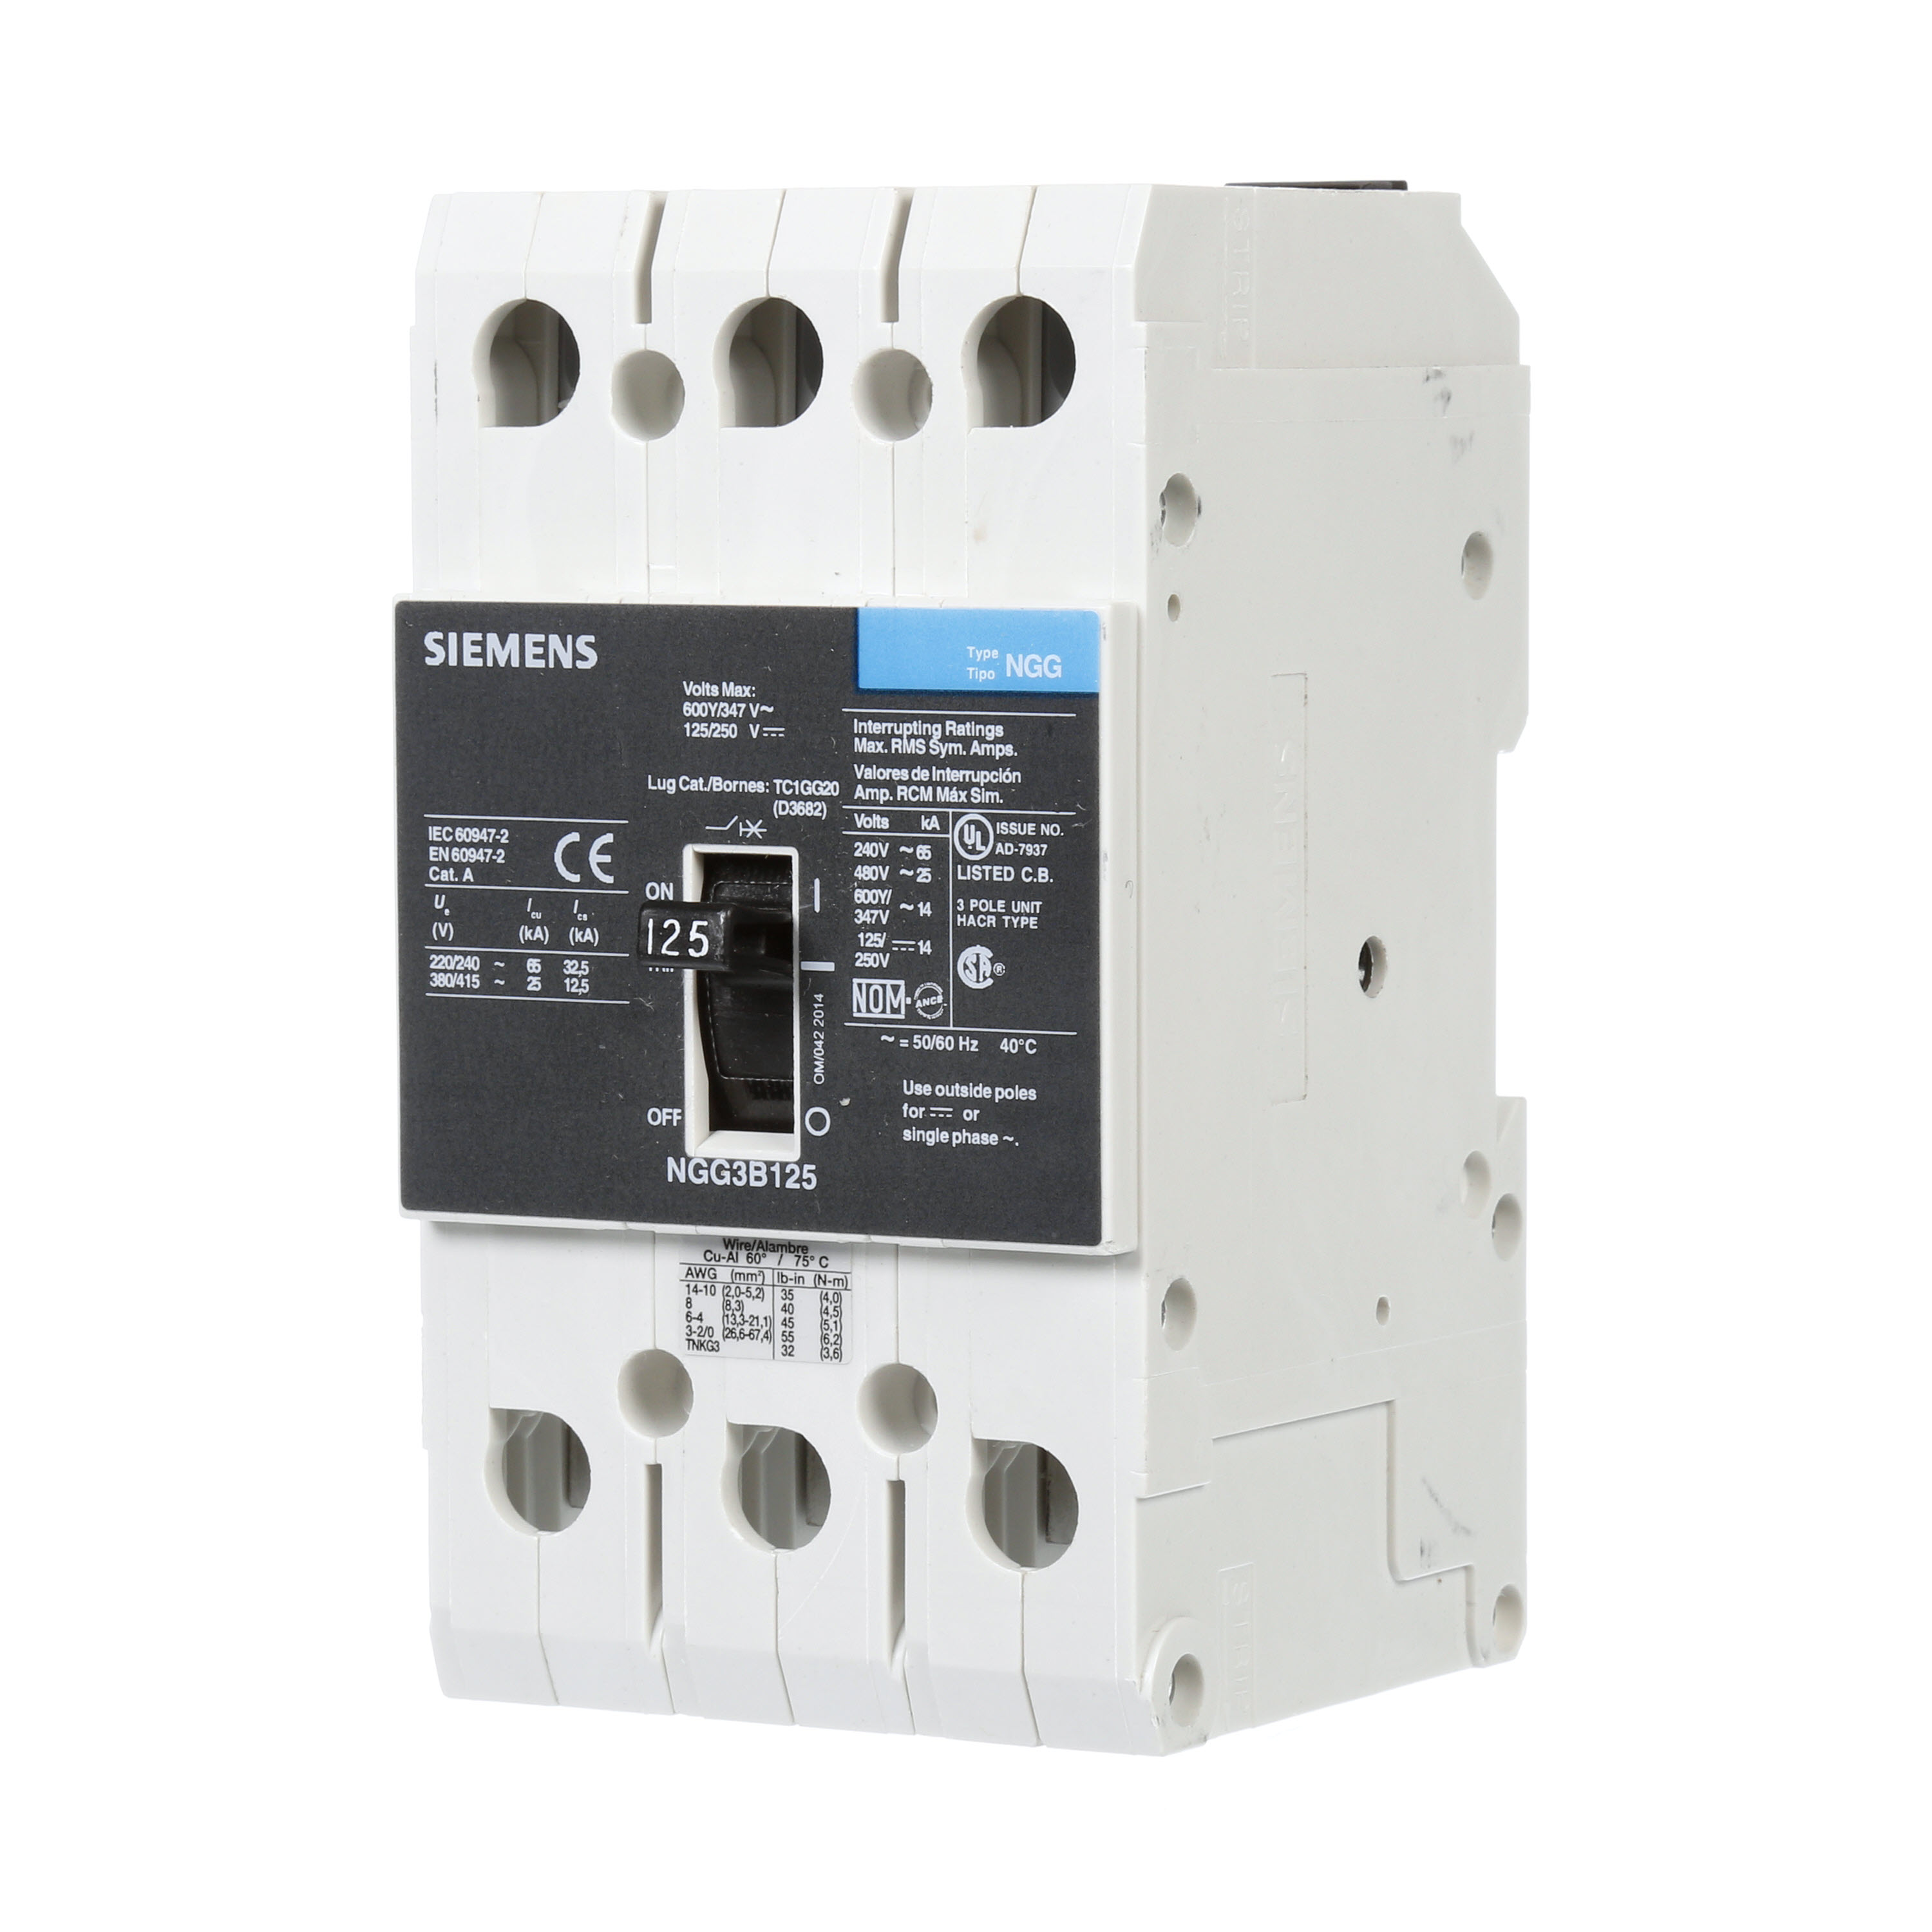 SIEMENS LOW VOLTAGE G FRAME CIRCUIT BREAKER WITH THERMAL - MAGNETIC TRIP. UL LISTED NGG FRAME WITH STANDARD BREAKING CAPACITY. 125A 3-POLE (14KAIC AT 600Y/347V) (25KAIC AT 480V). SPECIAL FEATURES MOUNTS ON DIN RAIL / SCREW, LINE AND LOAD SIDE LUGS (TC1GG20) WIRE RANGE 8 - 1/0 AWS (CU/AL). DIMENSIONS (W x H x D) IN 3 x5.4 x 2.8.